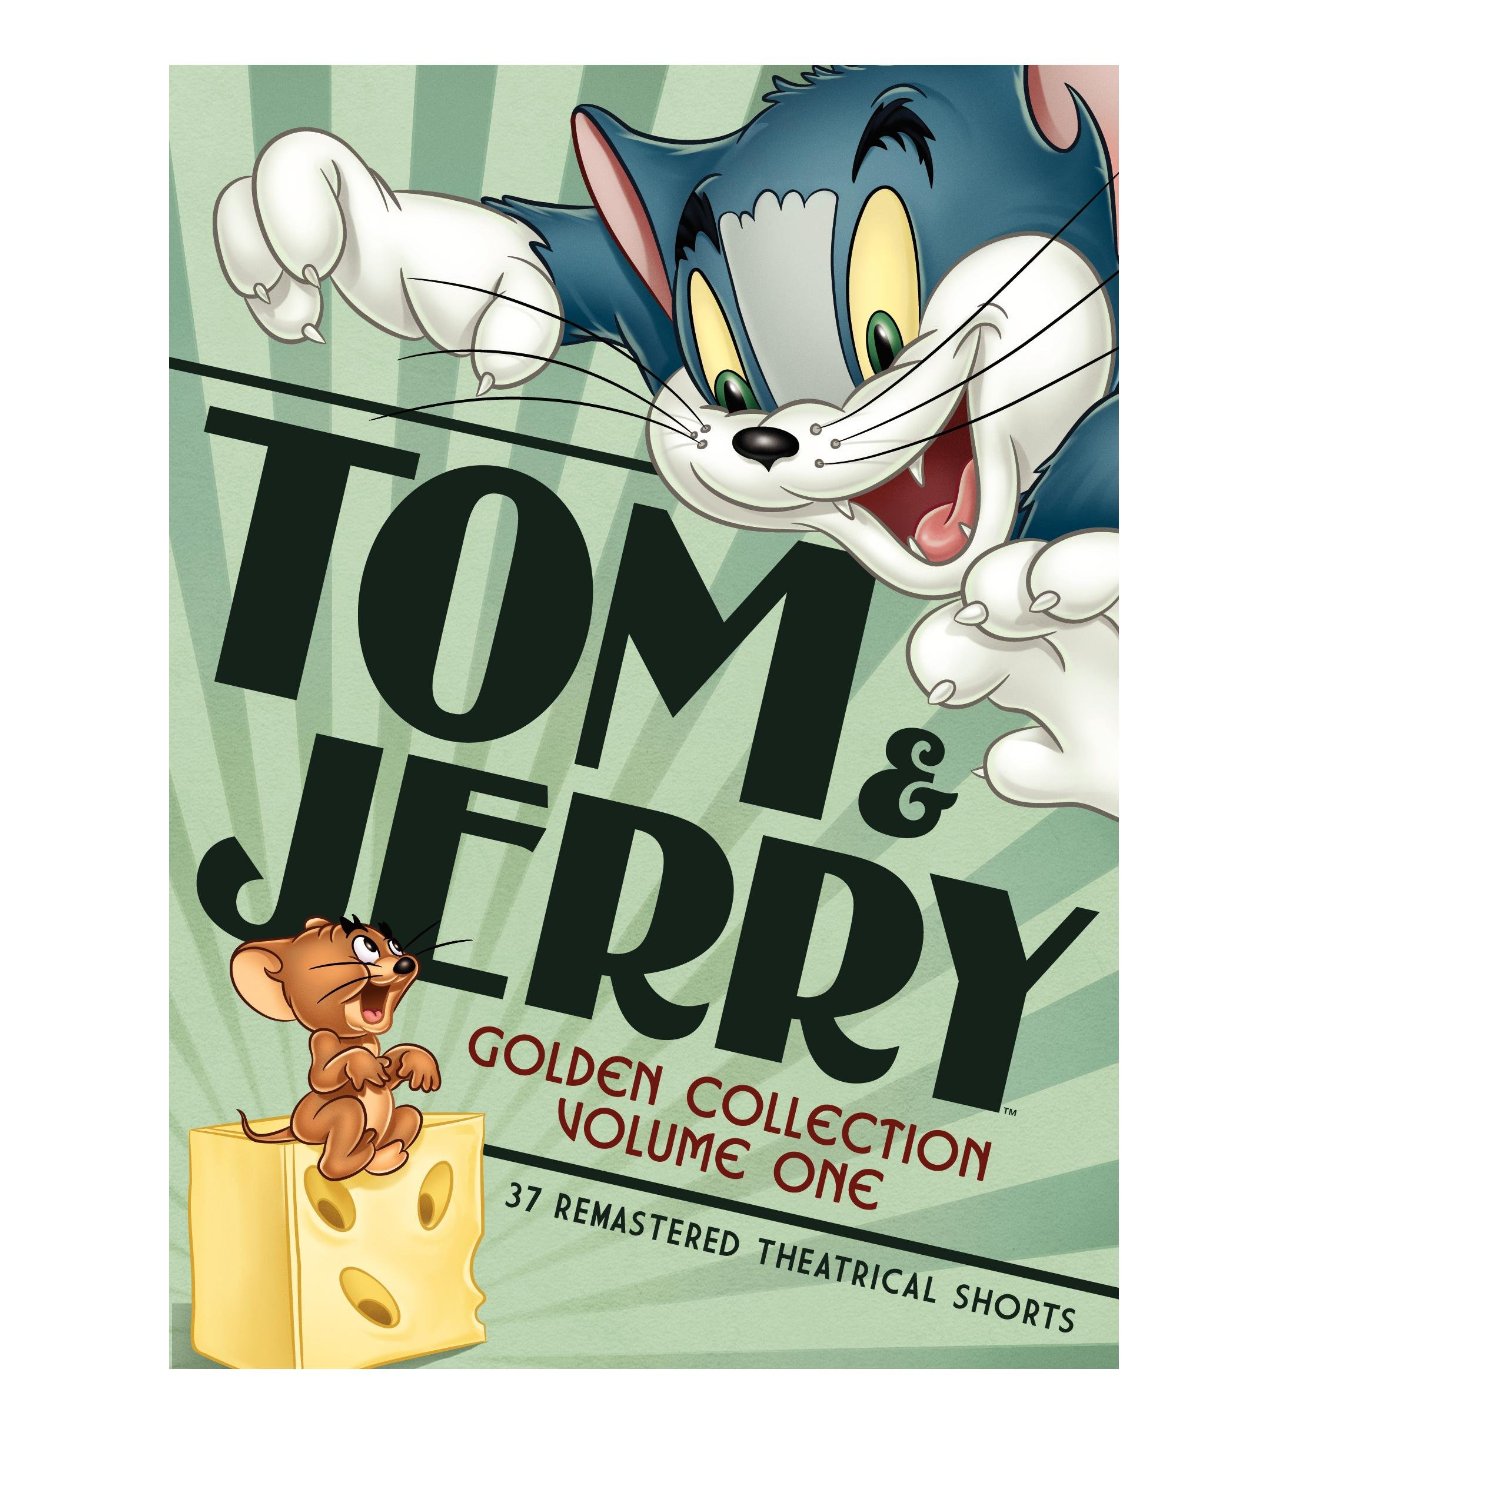 Tom & Jerry Golden Collection: Volume One (2011) DVD $16.99